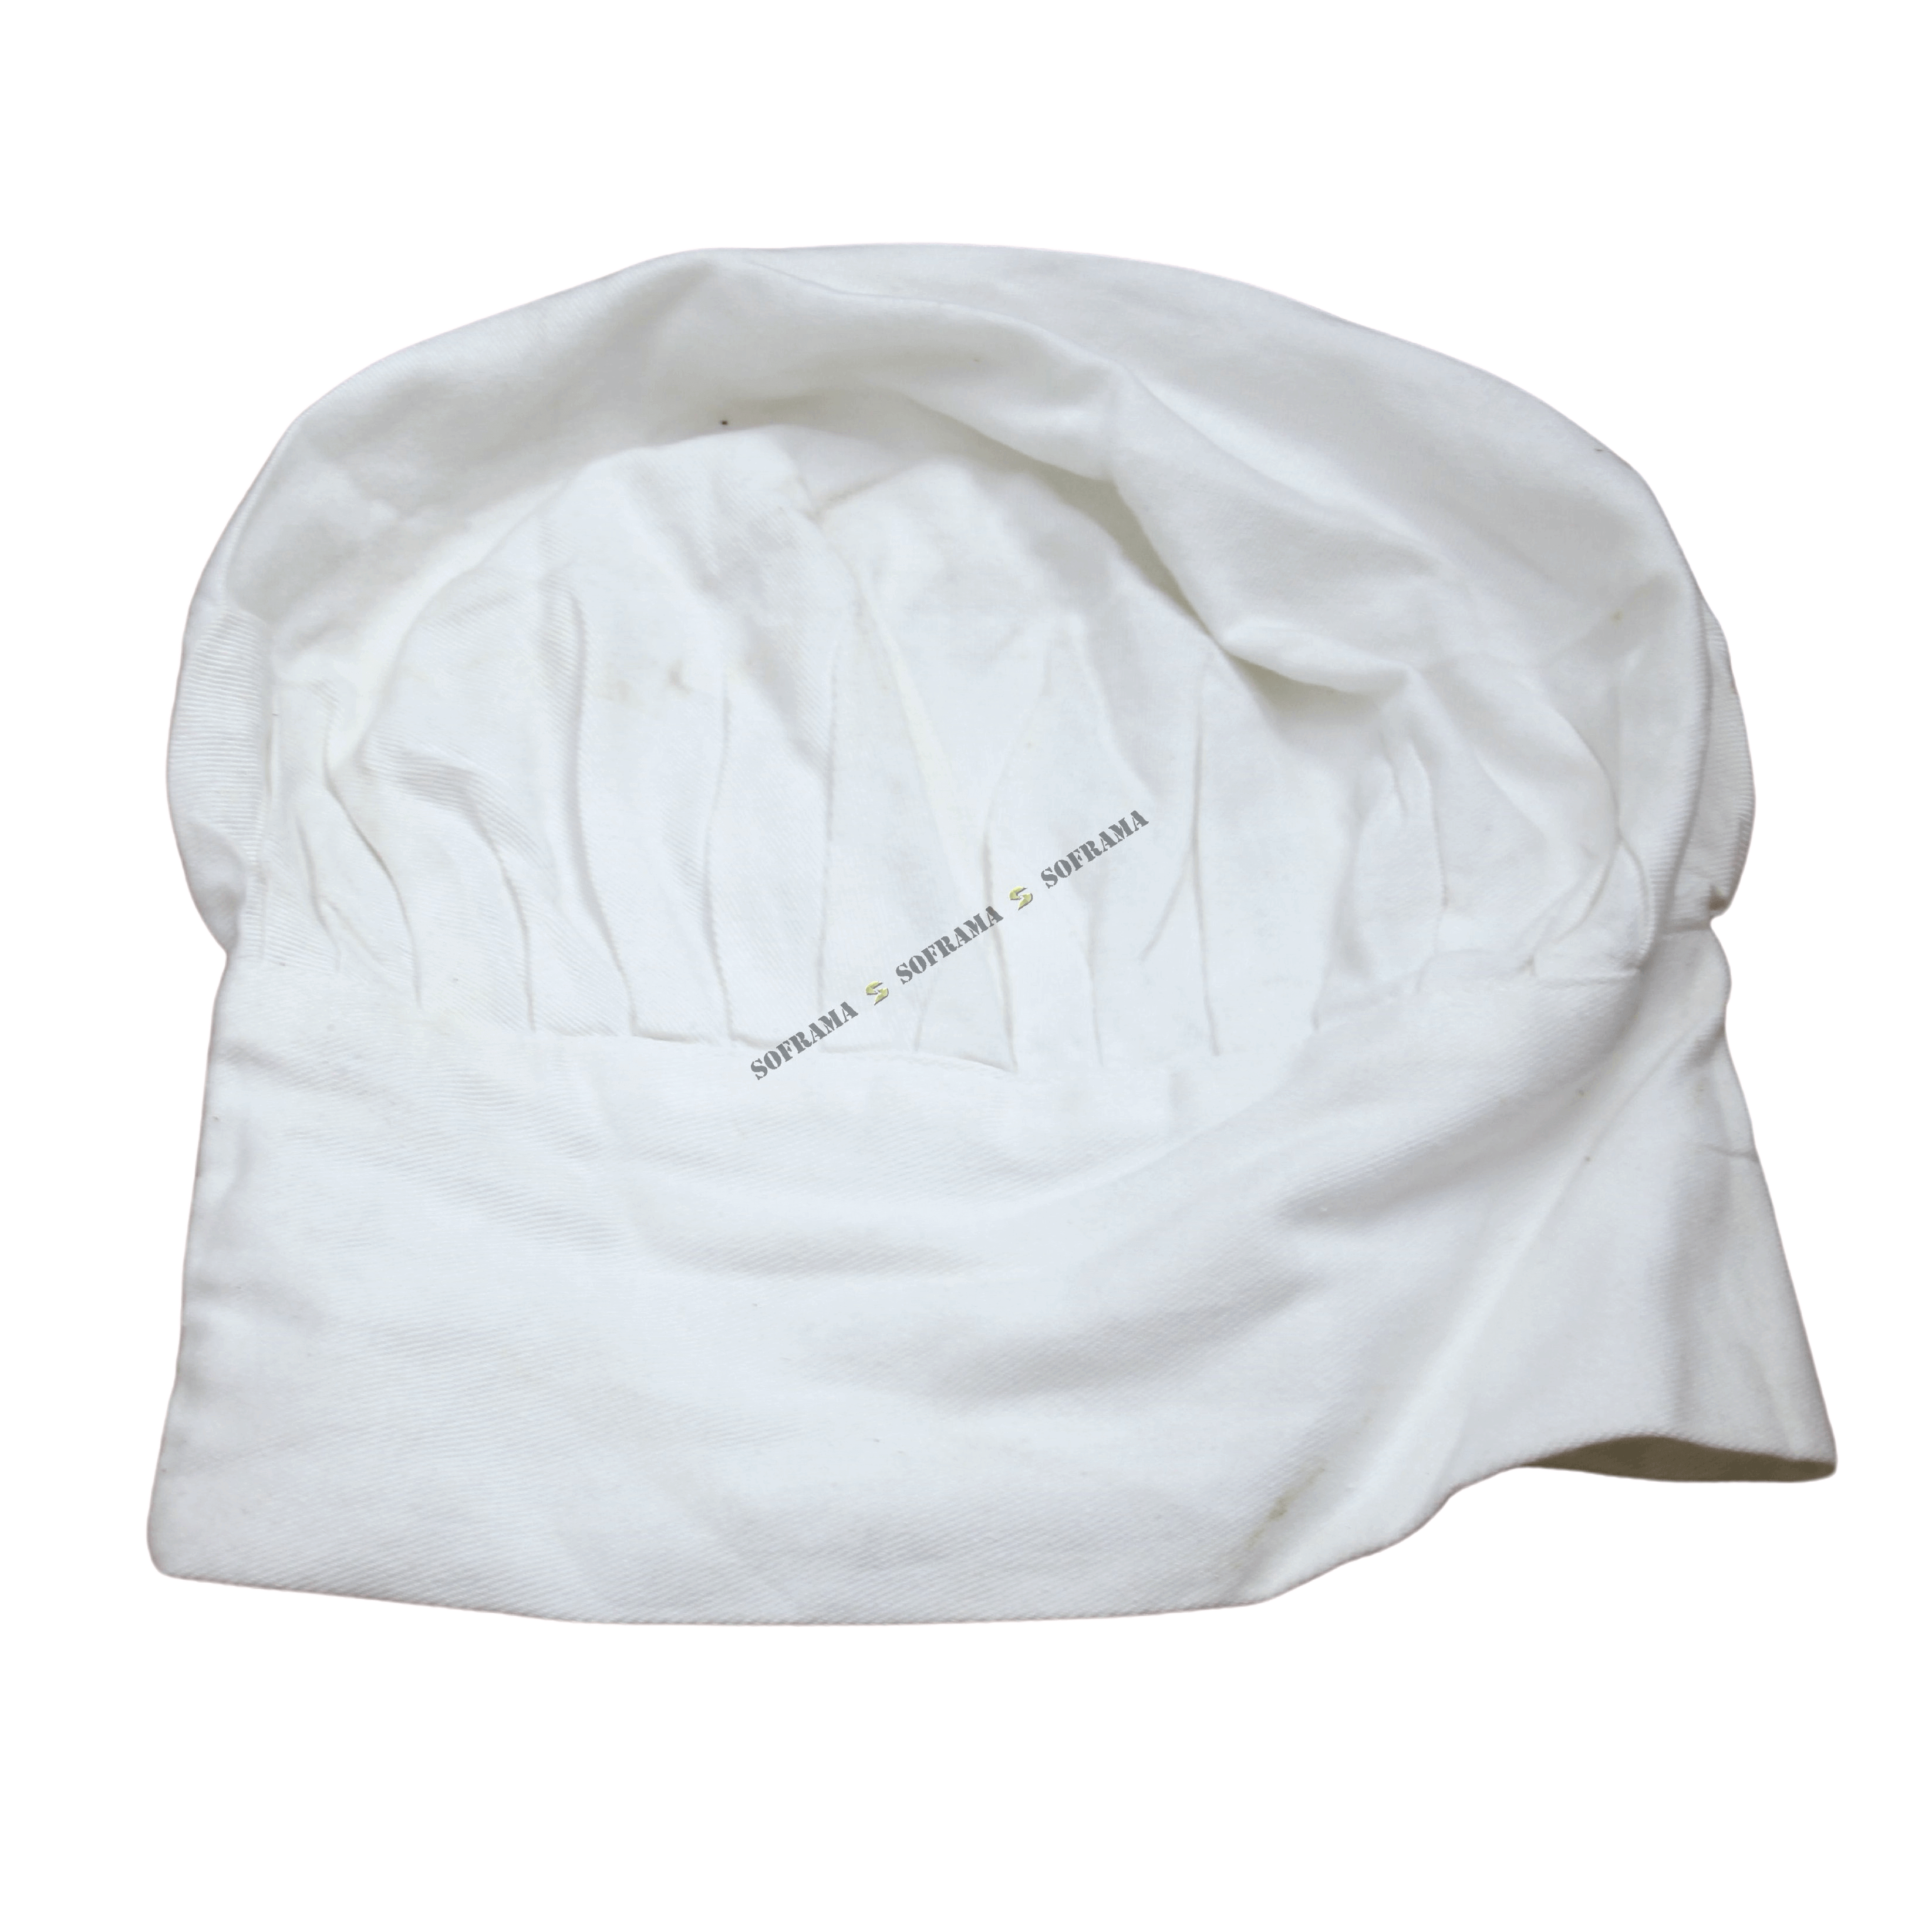 French army cook hat - Soframa